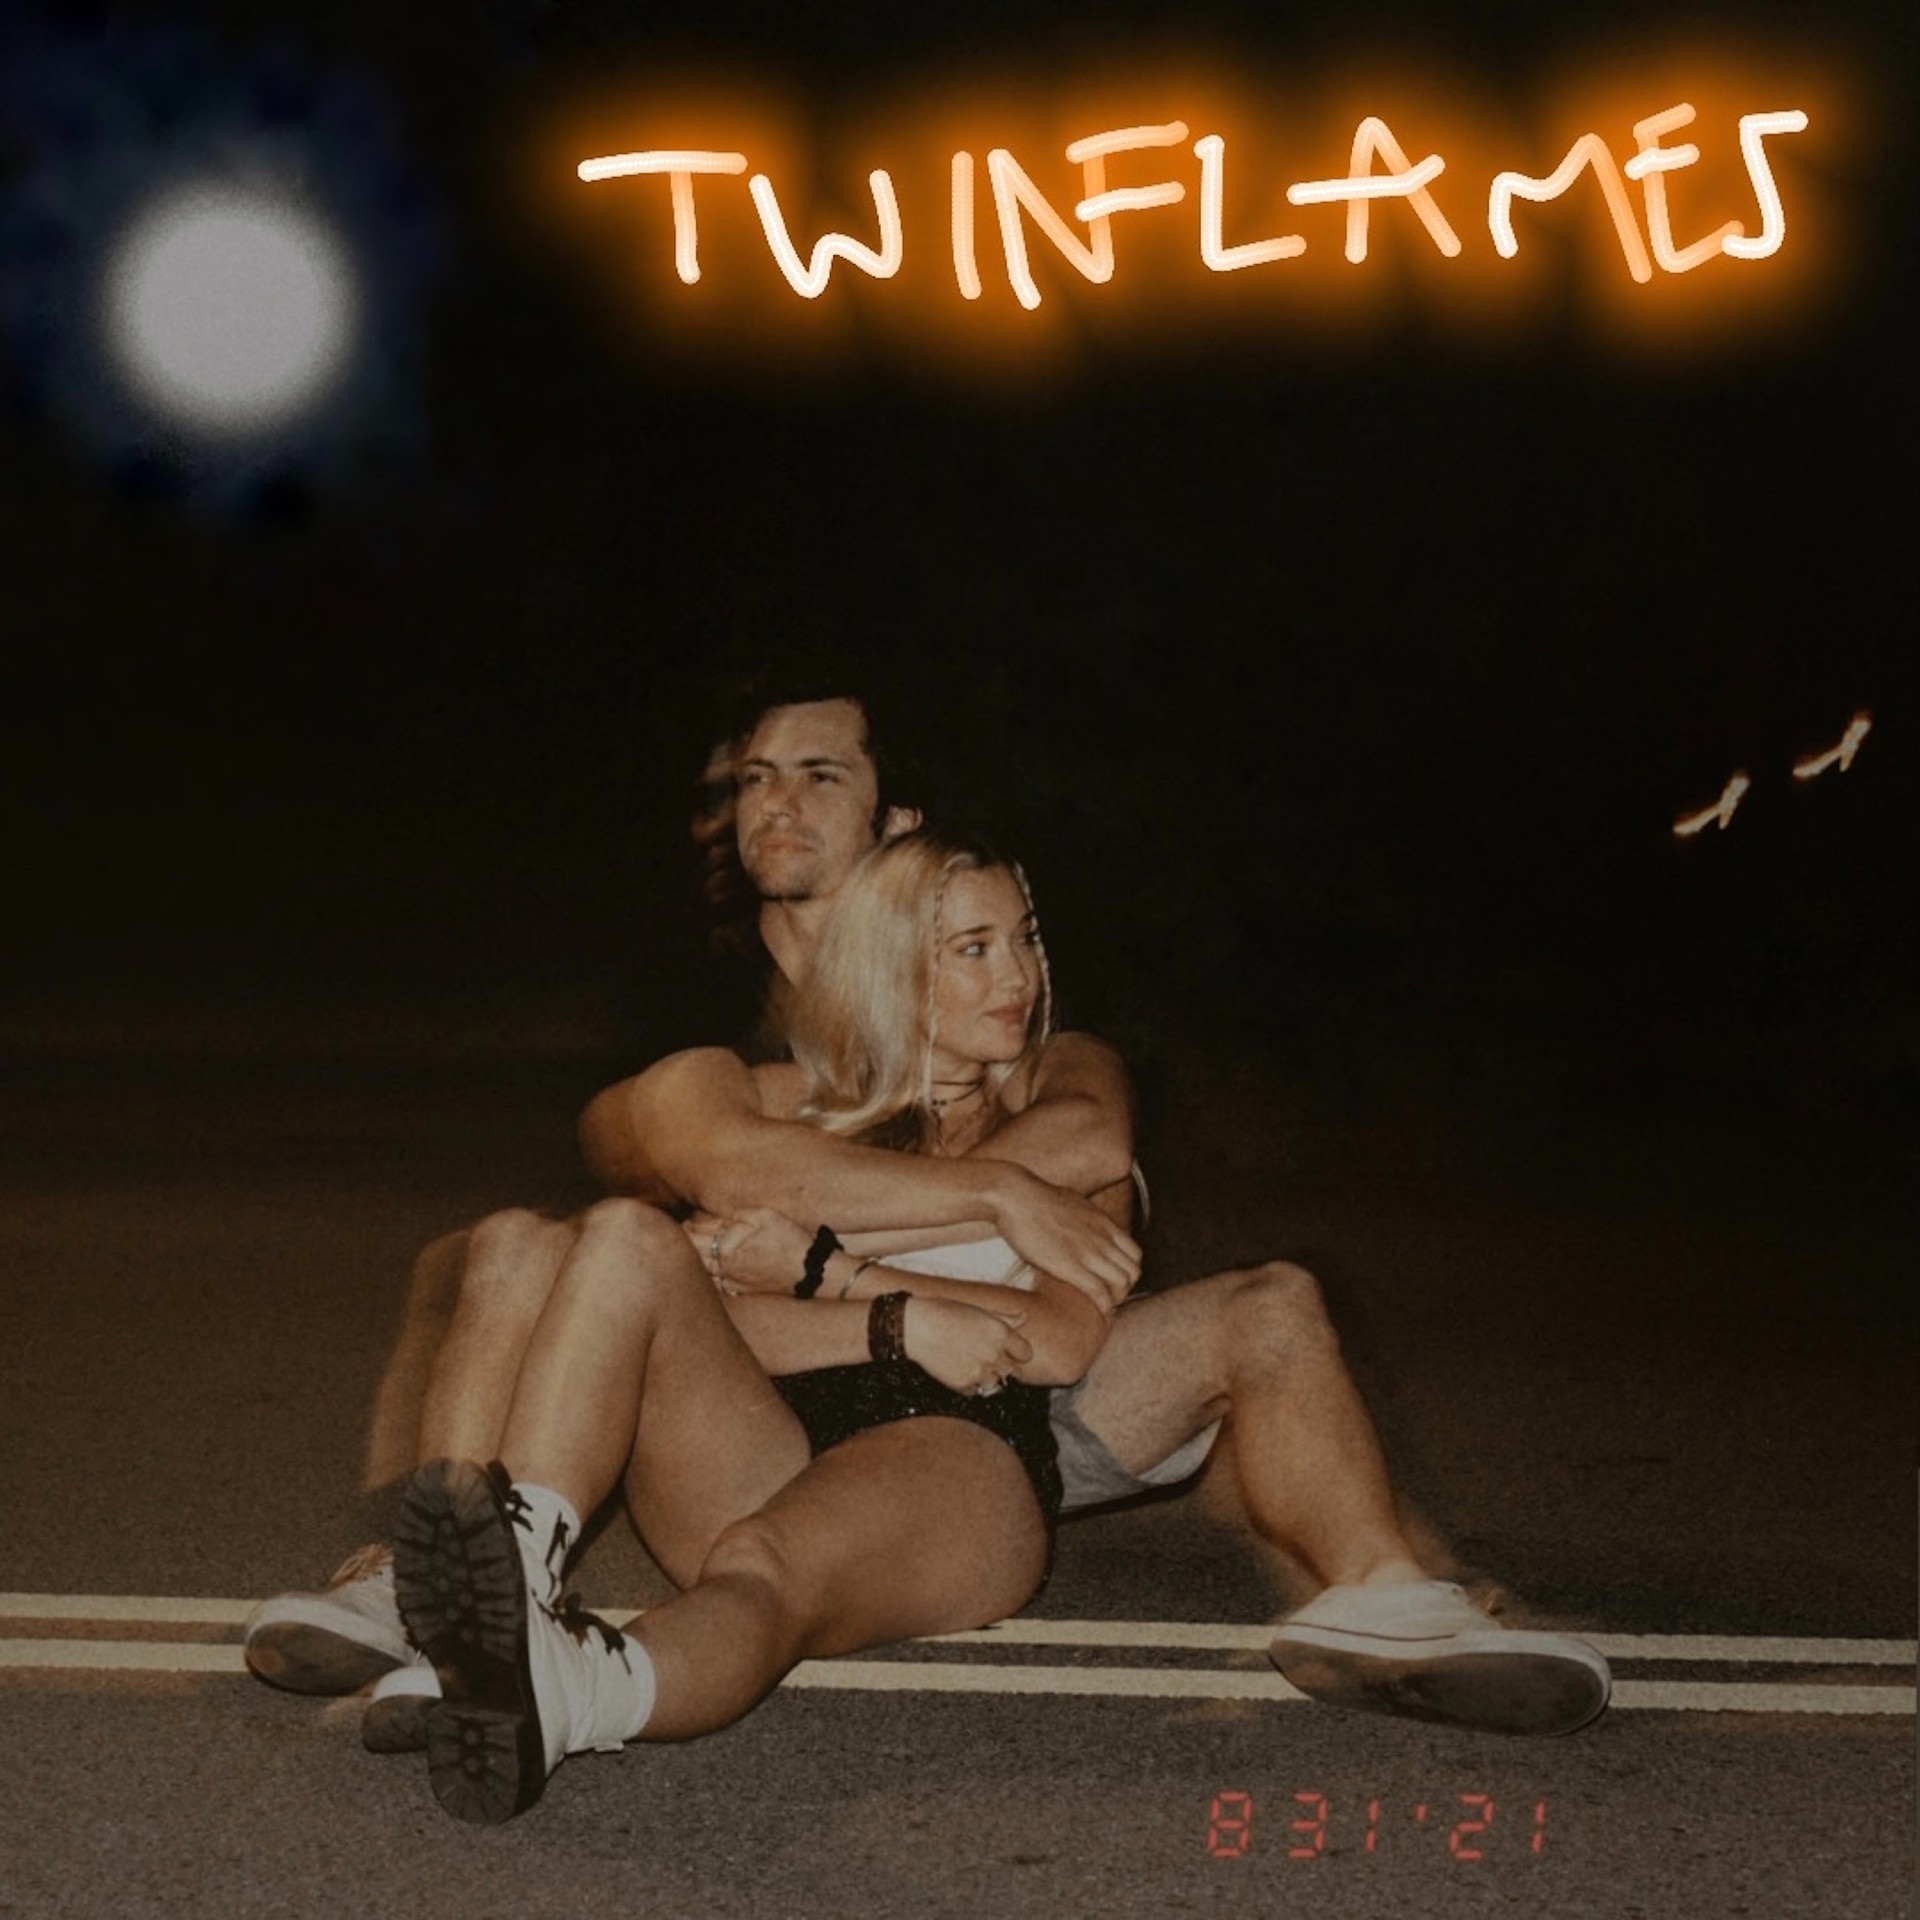 Artwork for the single “TWINFLAMES” by Chloé Caroline